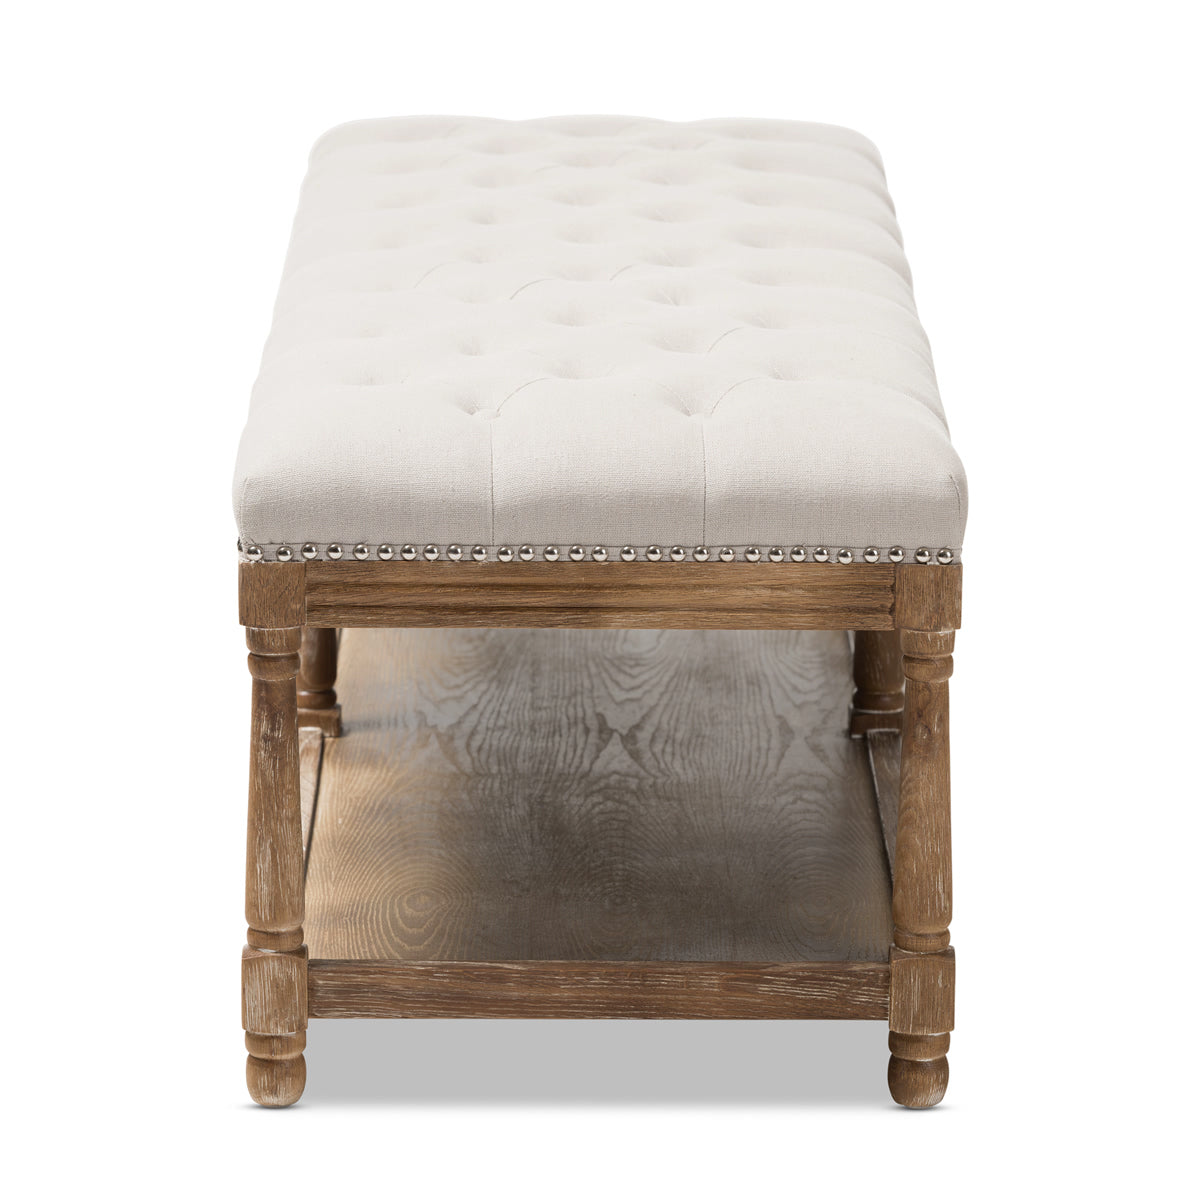 Baxton Studio Celeste French Country Weathered Oak Beige Linen Upholstered Ottoman Bench Baxton Studio-benches-Minimal And Modern - 4